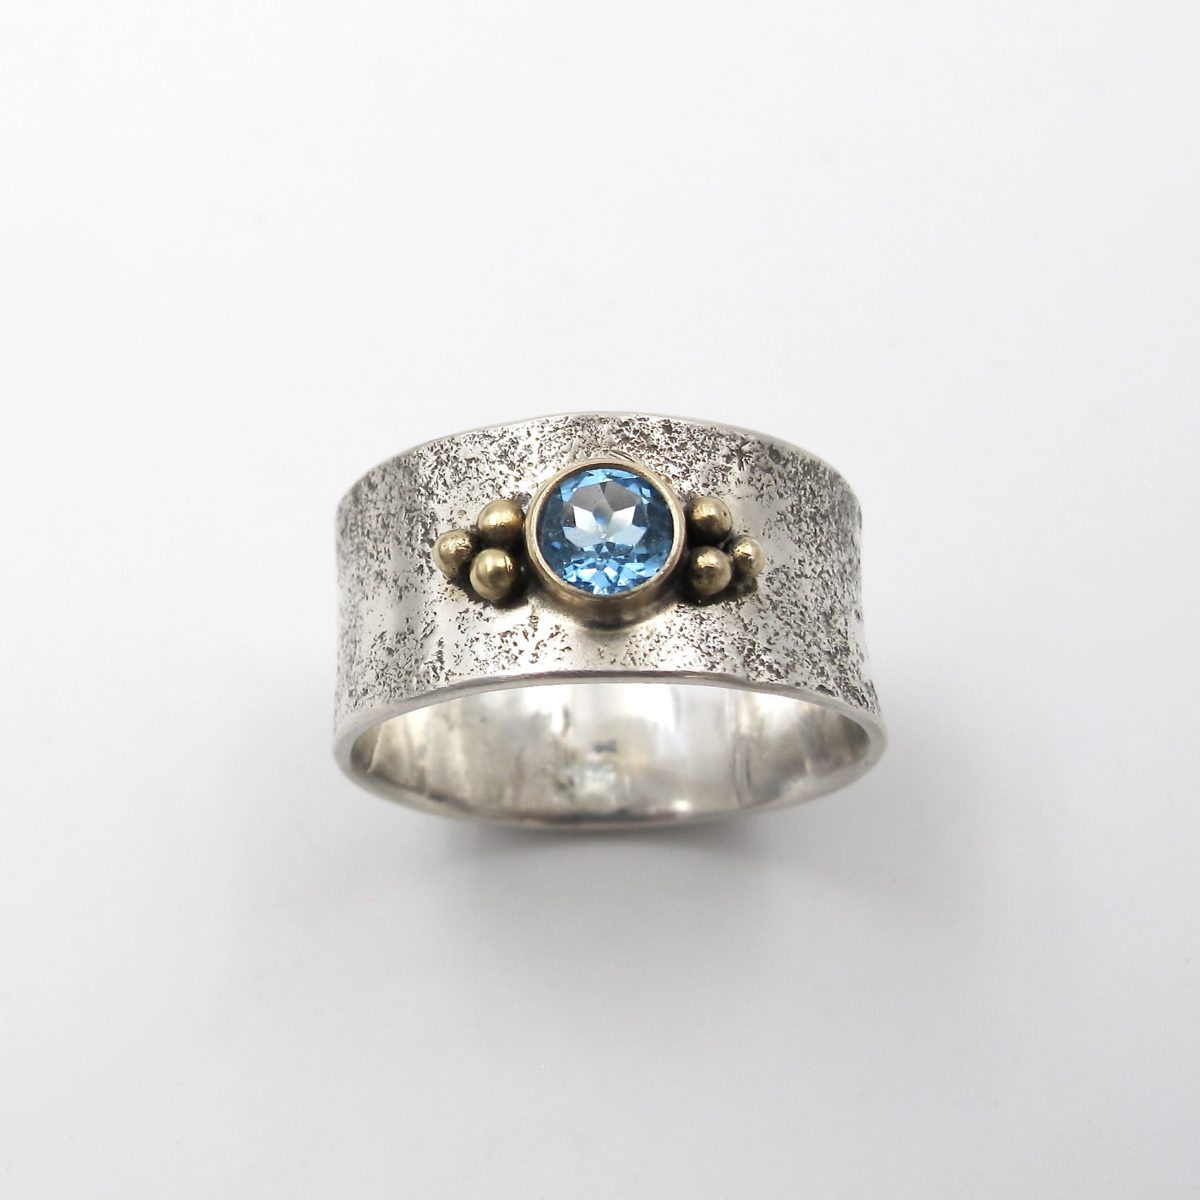 Gail Golden Jewelry Hand Made Rings-Taos New Mexico